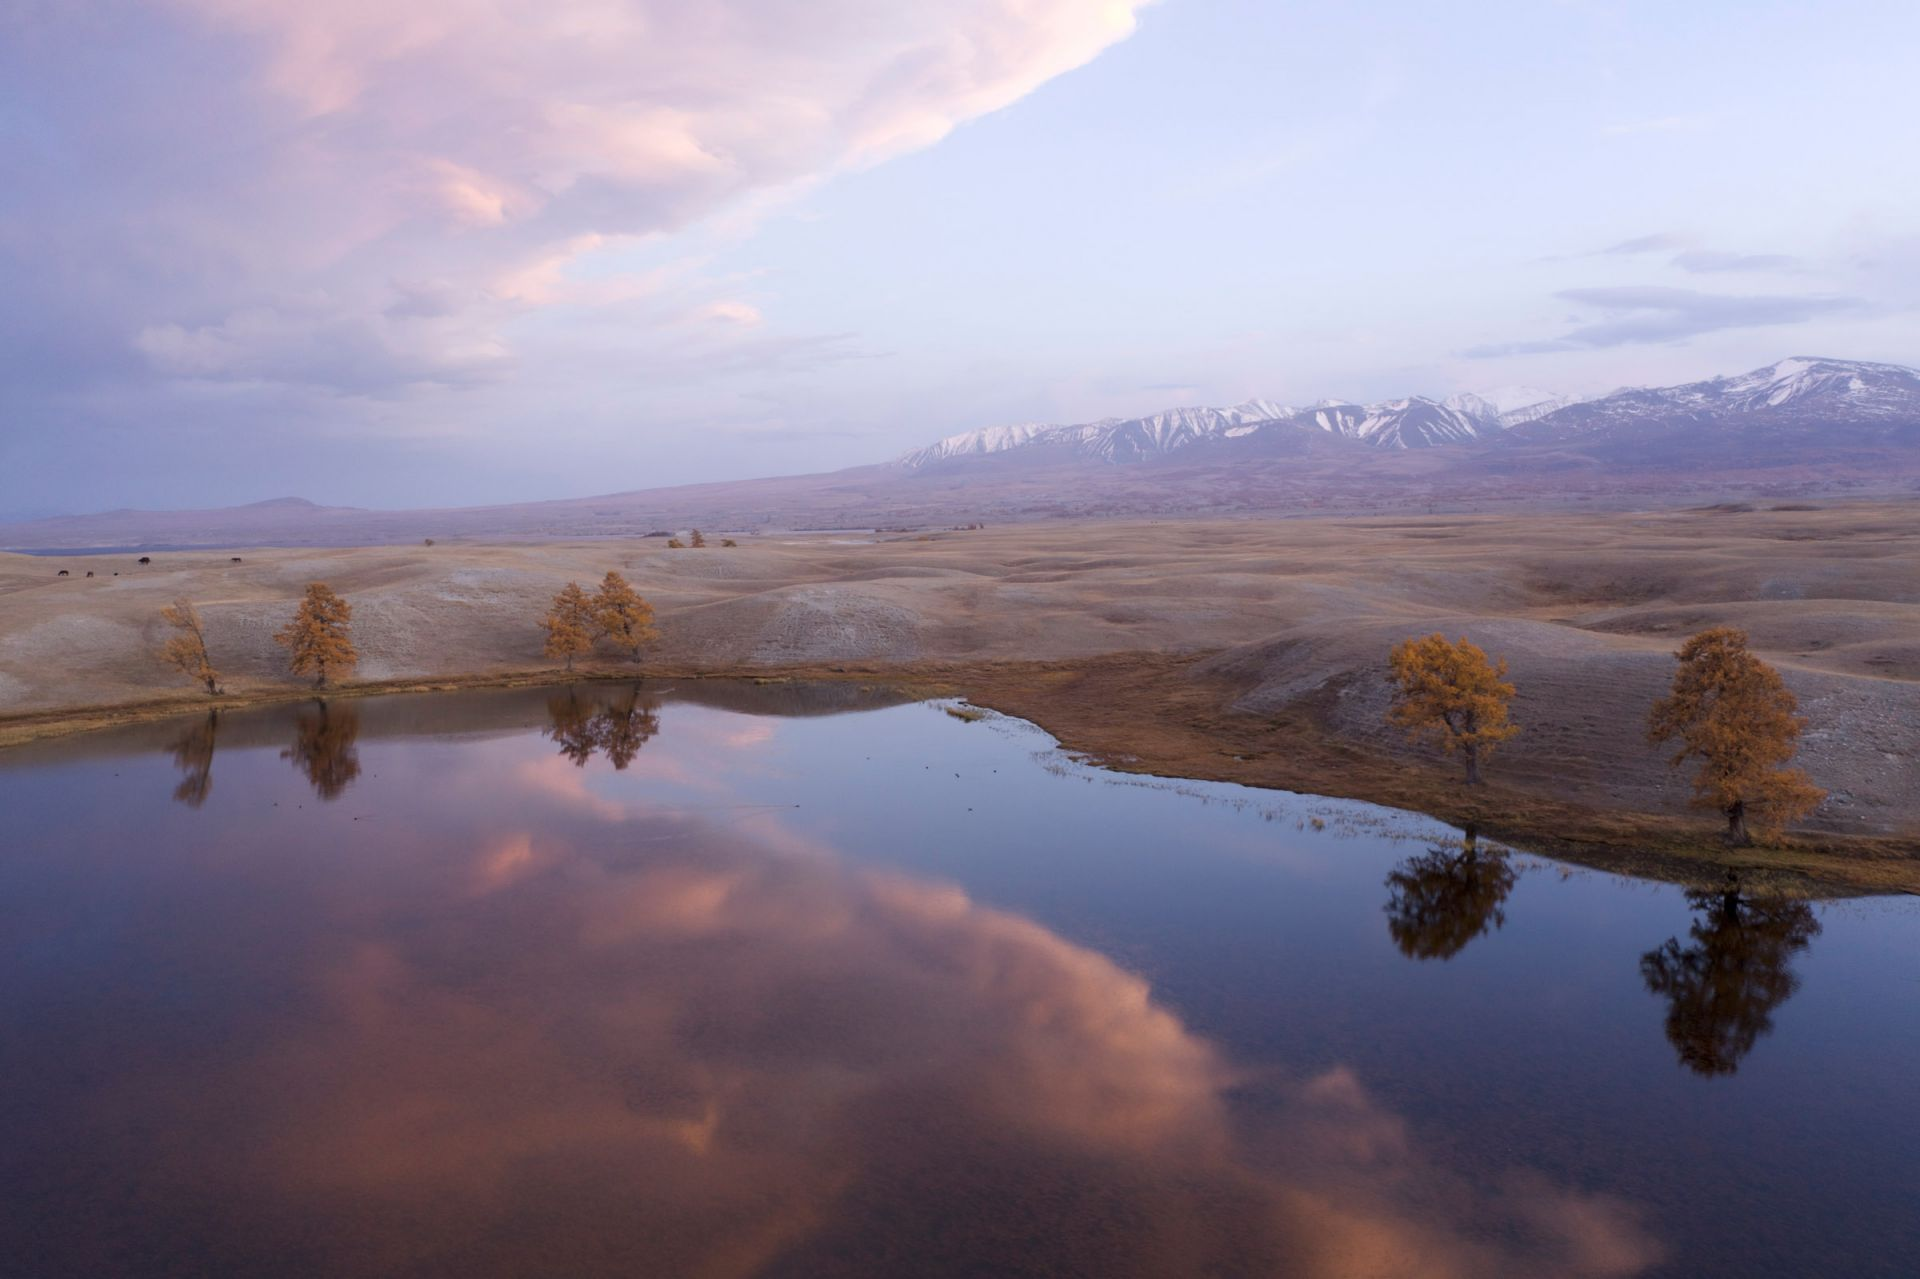 A breathtaking landscape of Mongolia, with high mountains and cold climate